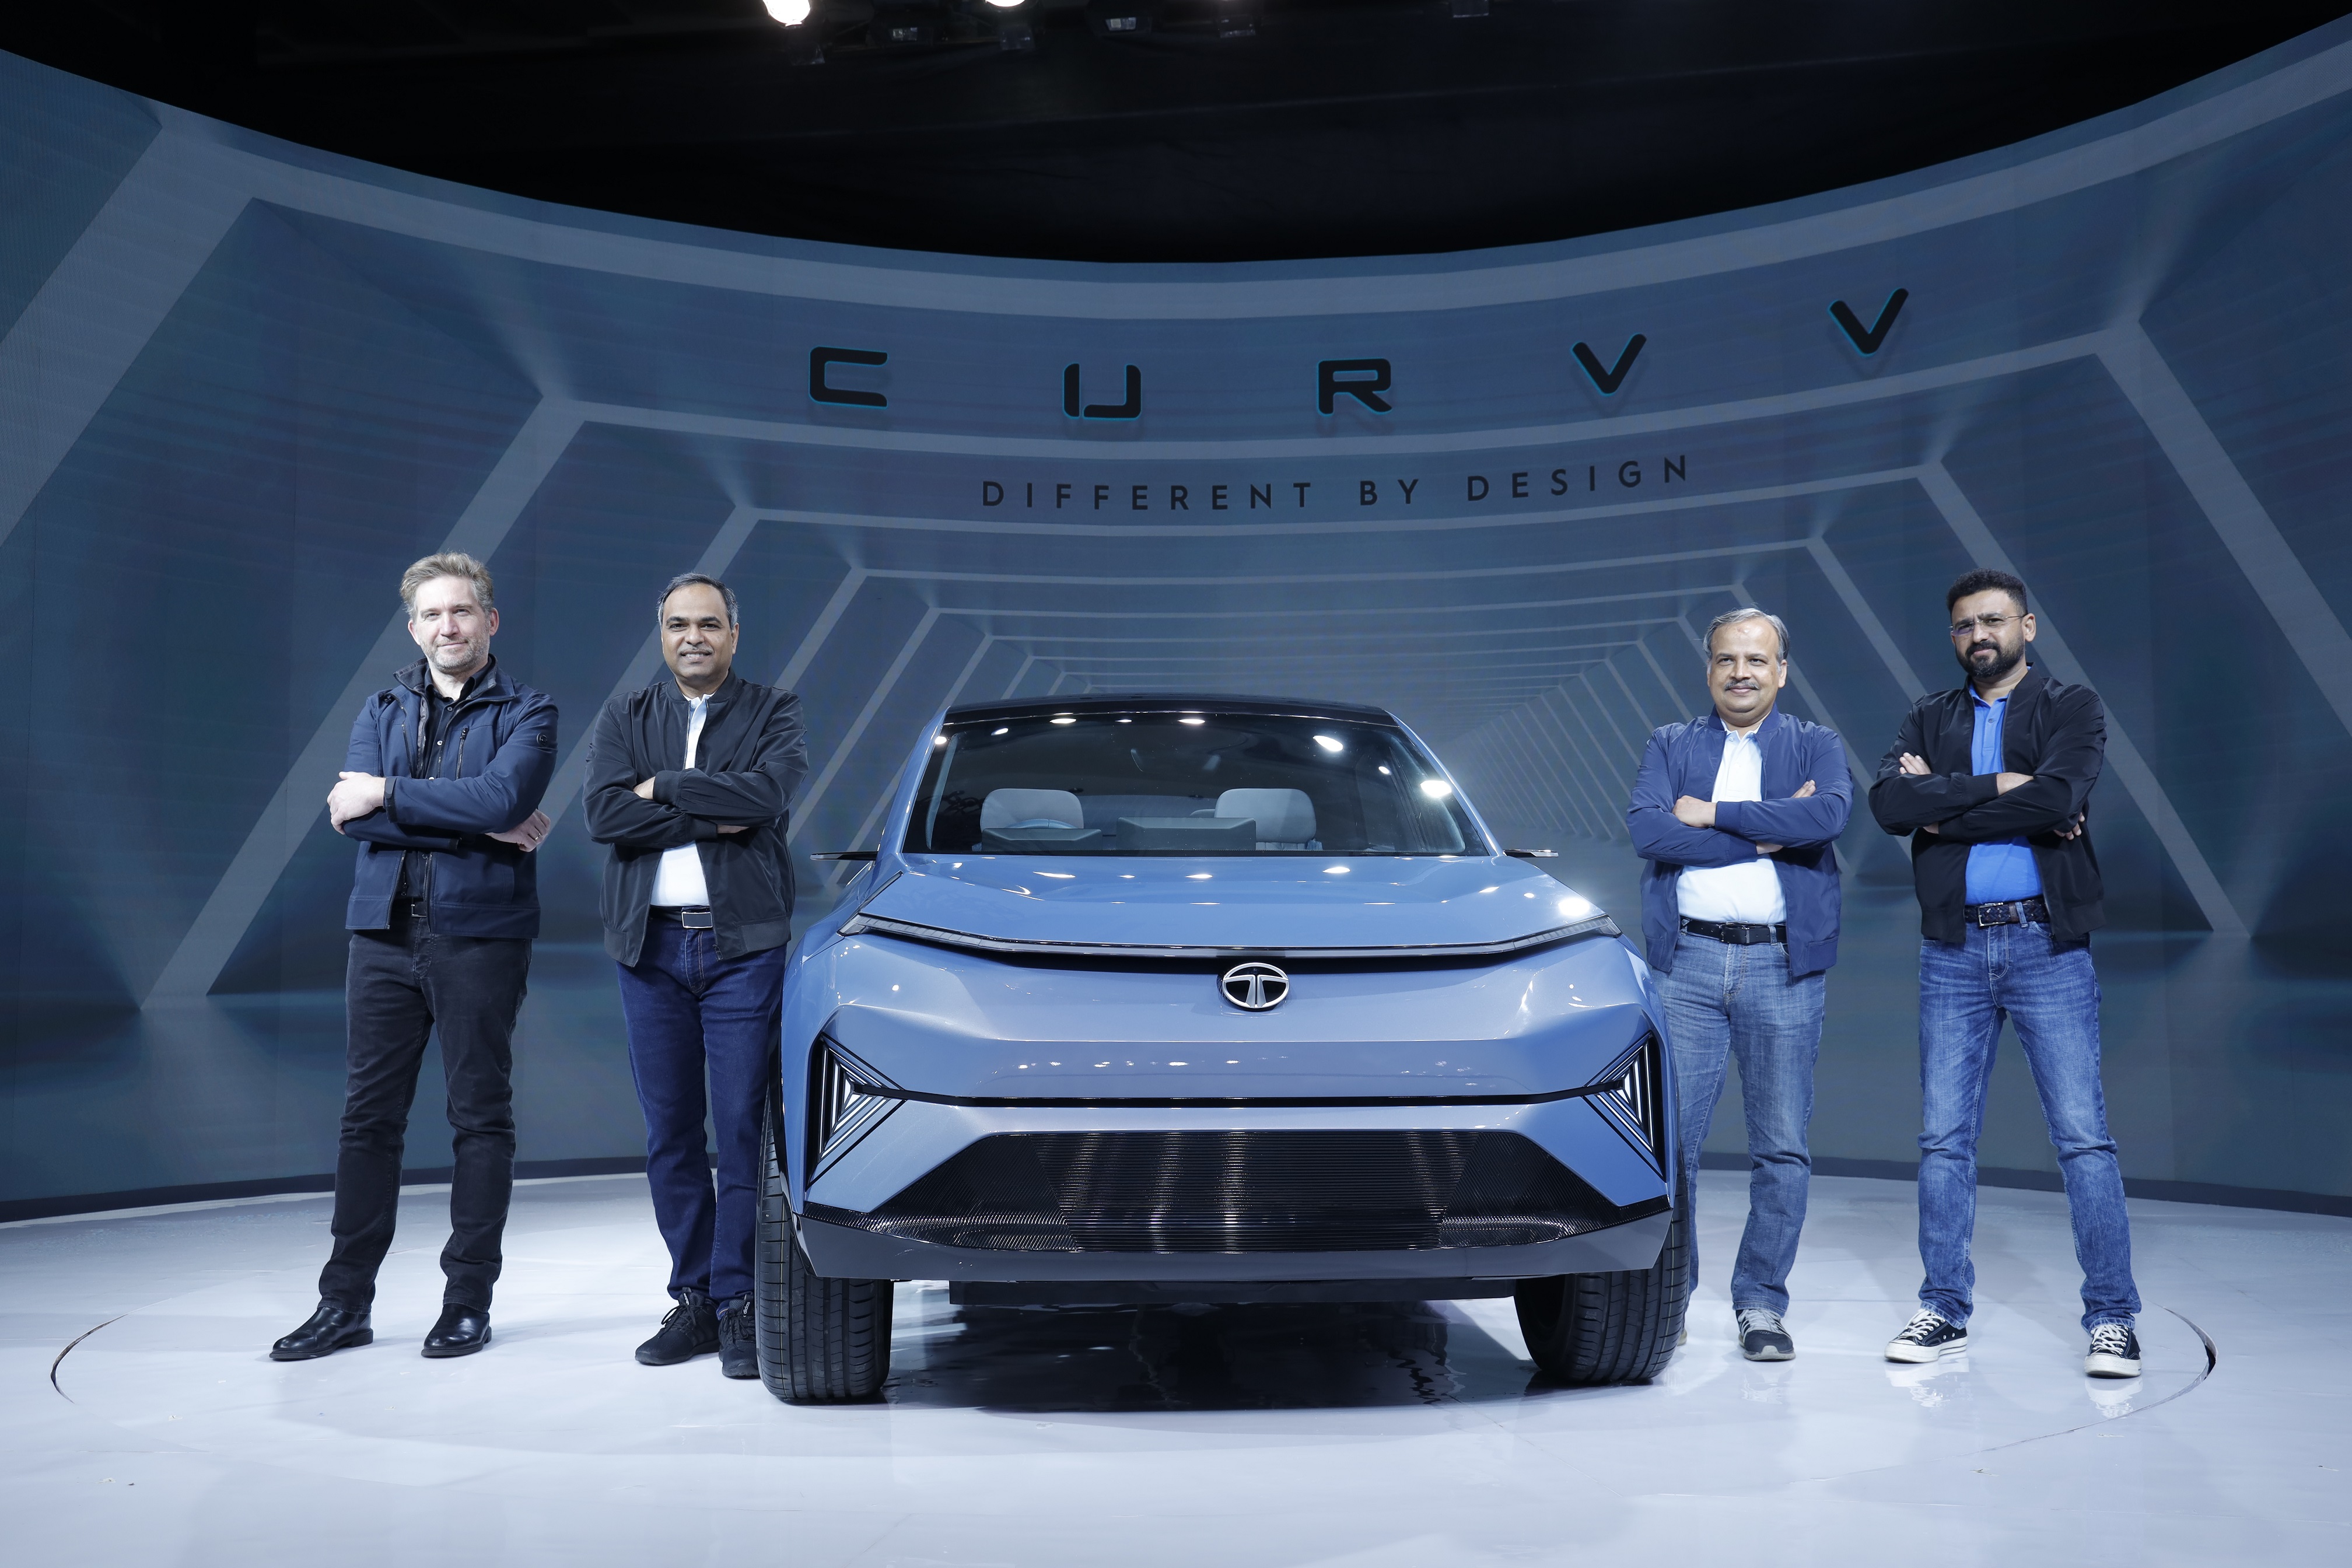 The Evolution of SUV Design is here Tata Motors showcases its Electric SUV Concept - CURVV